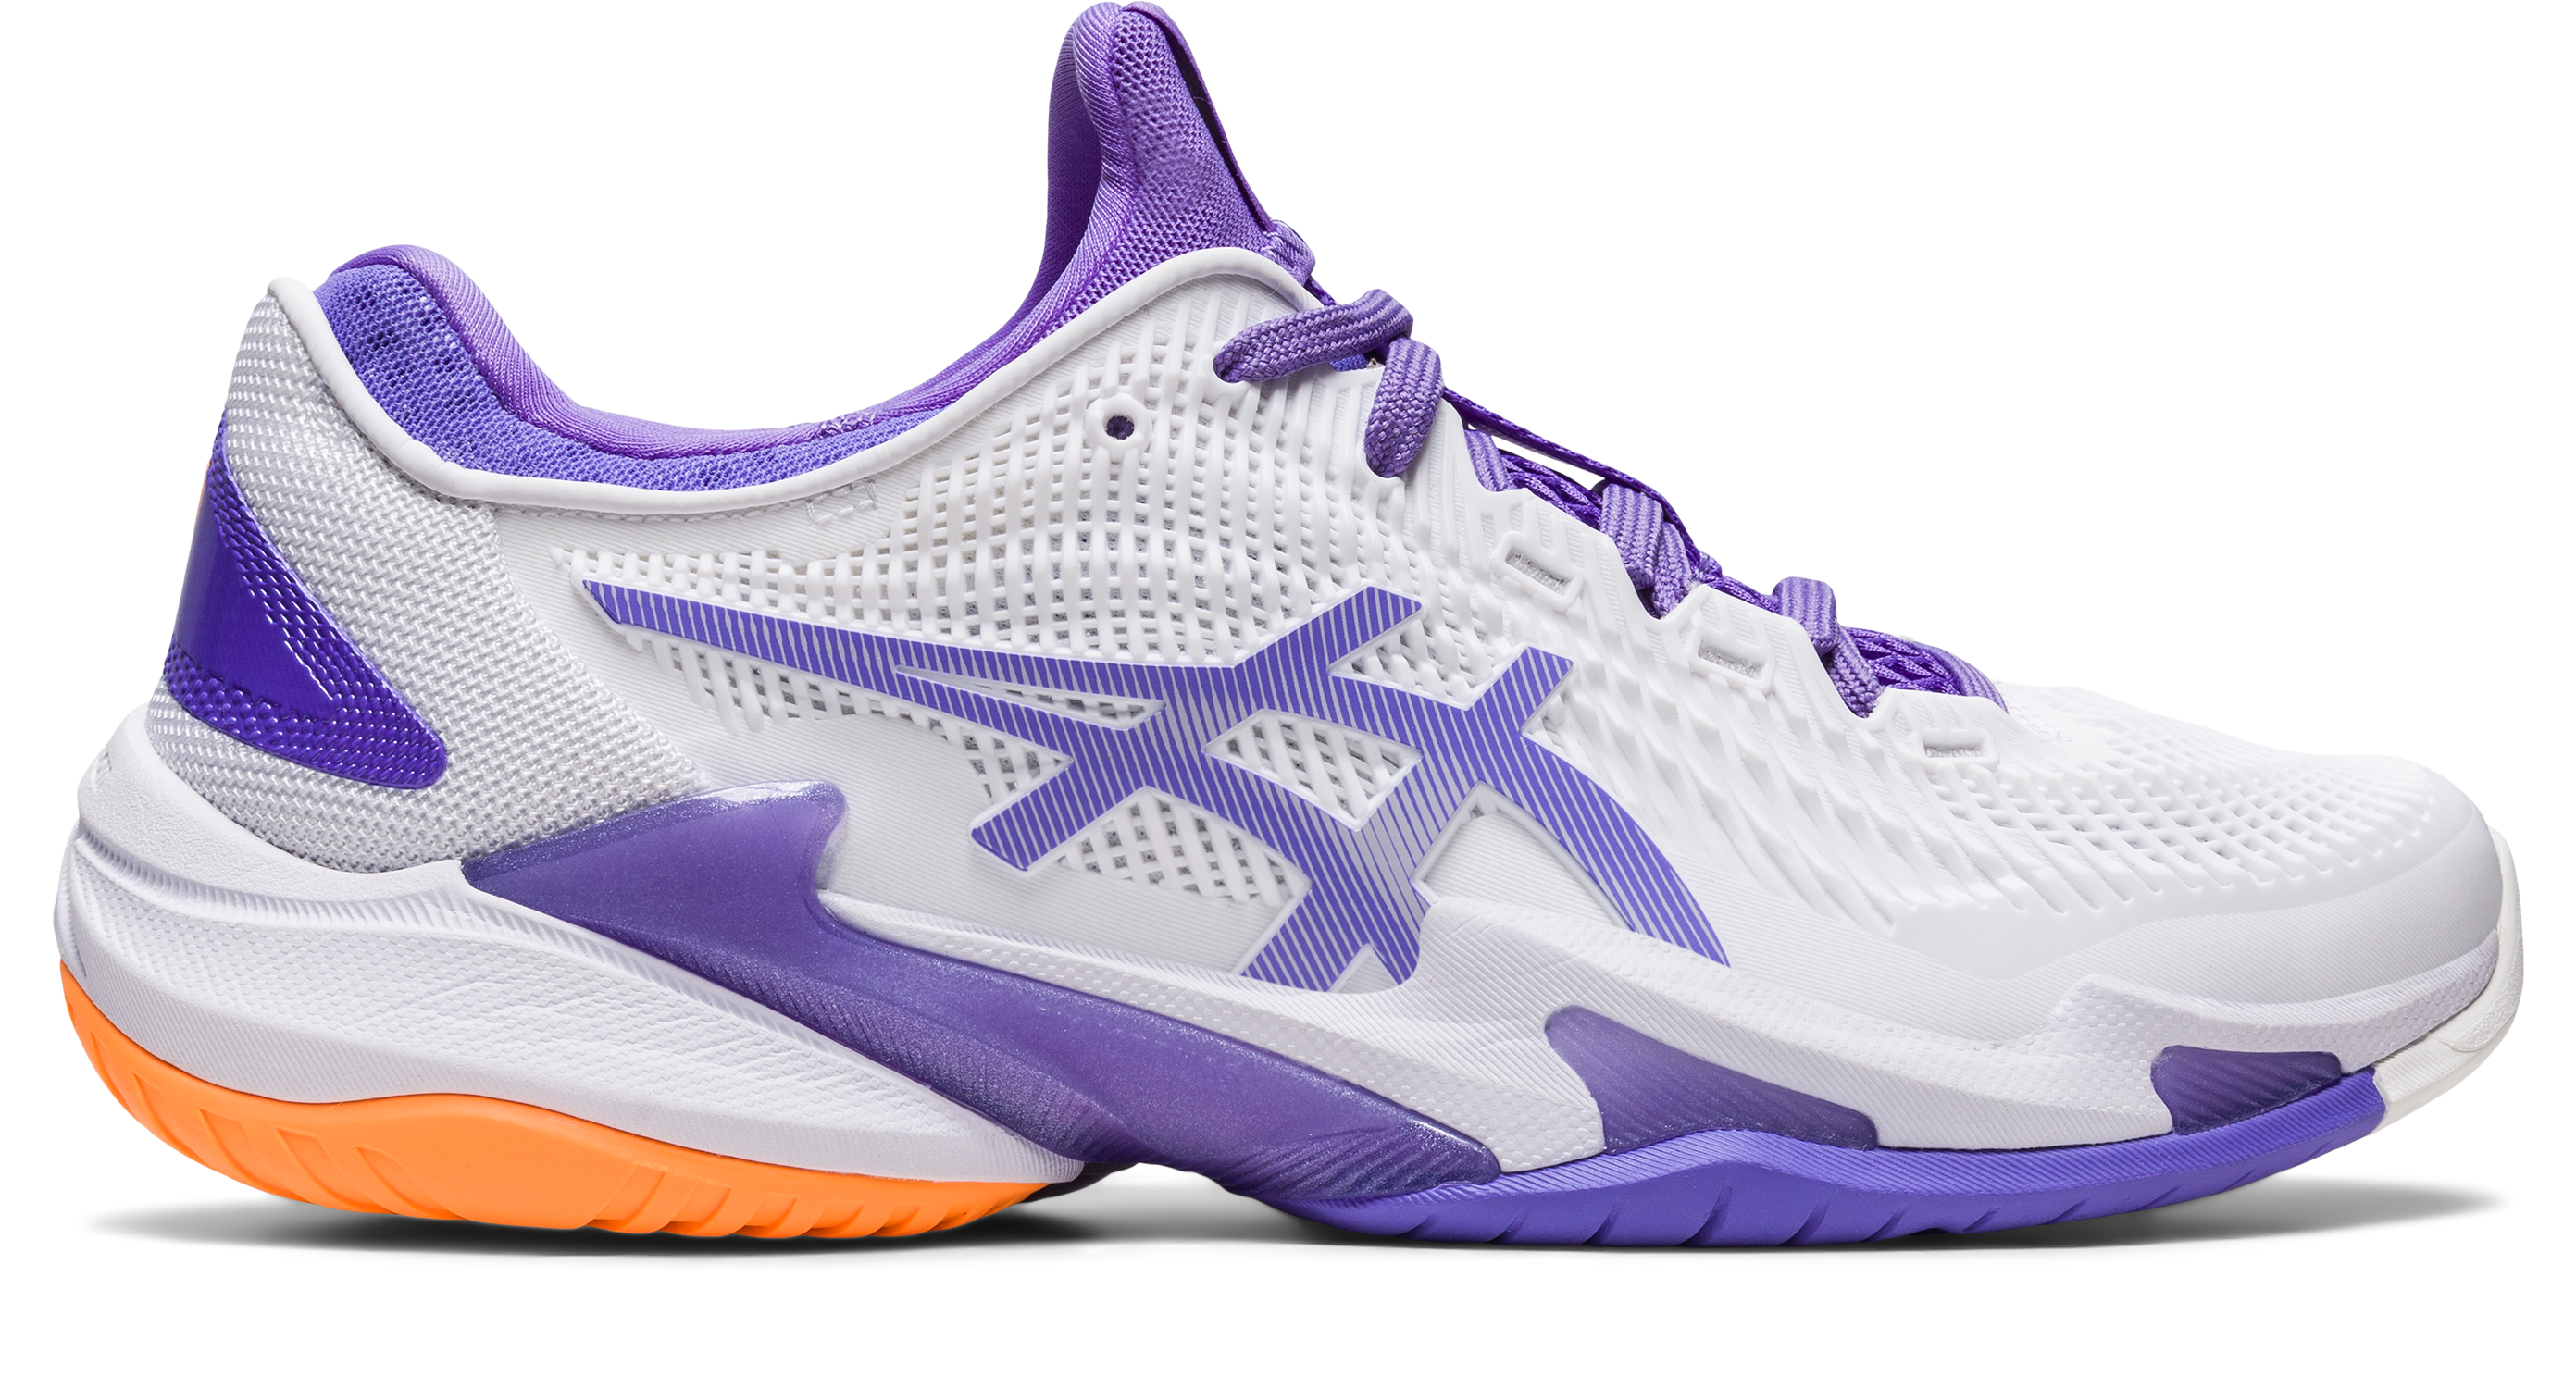 Asics Women's Court FF 3 Tennis Shoes in White/Amethyst